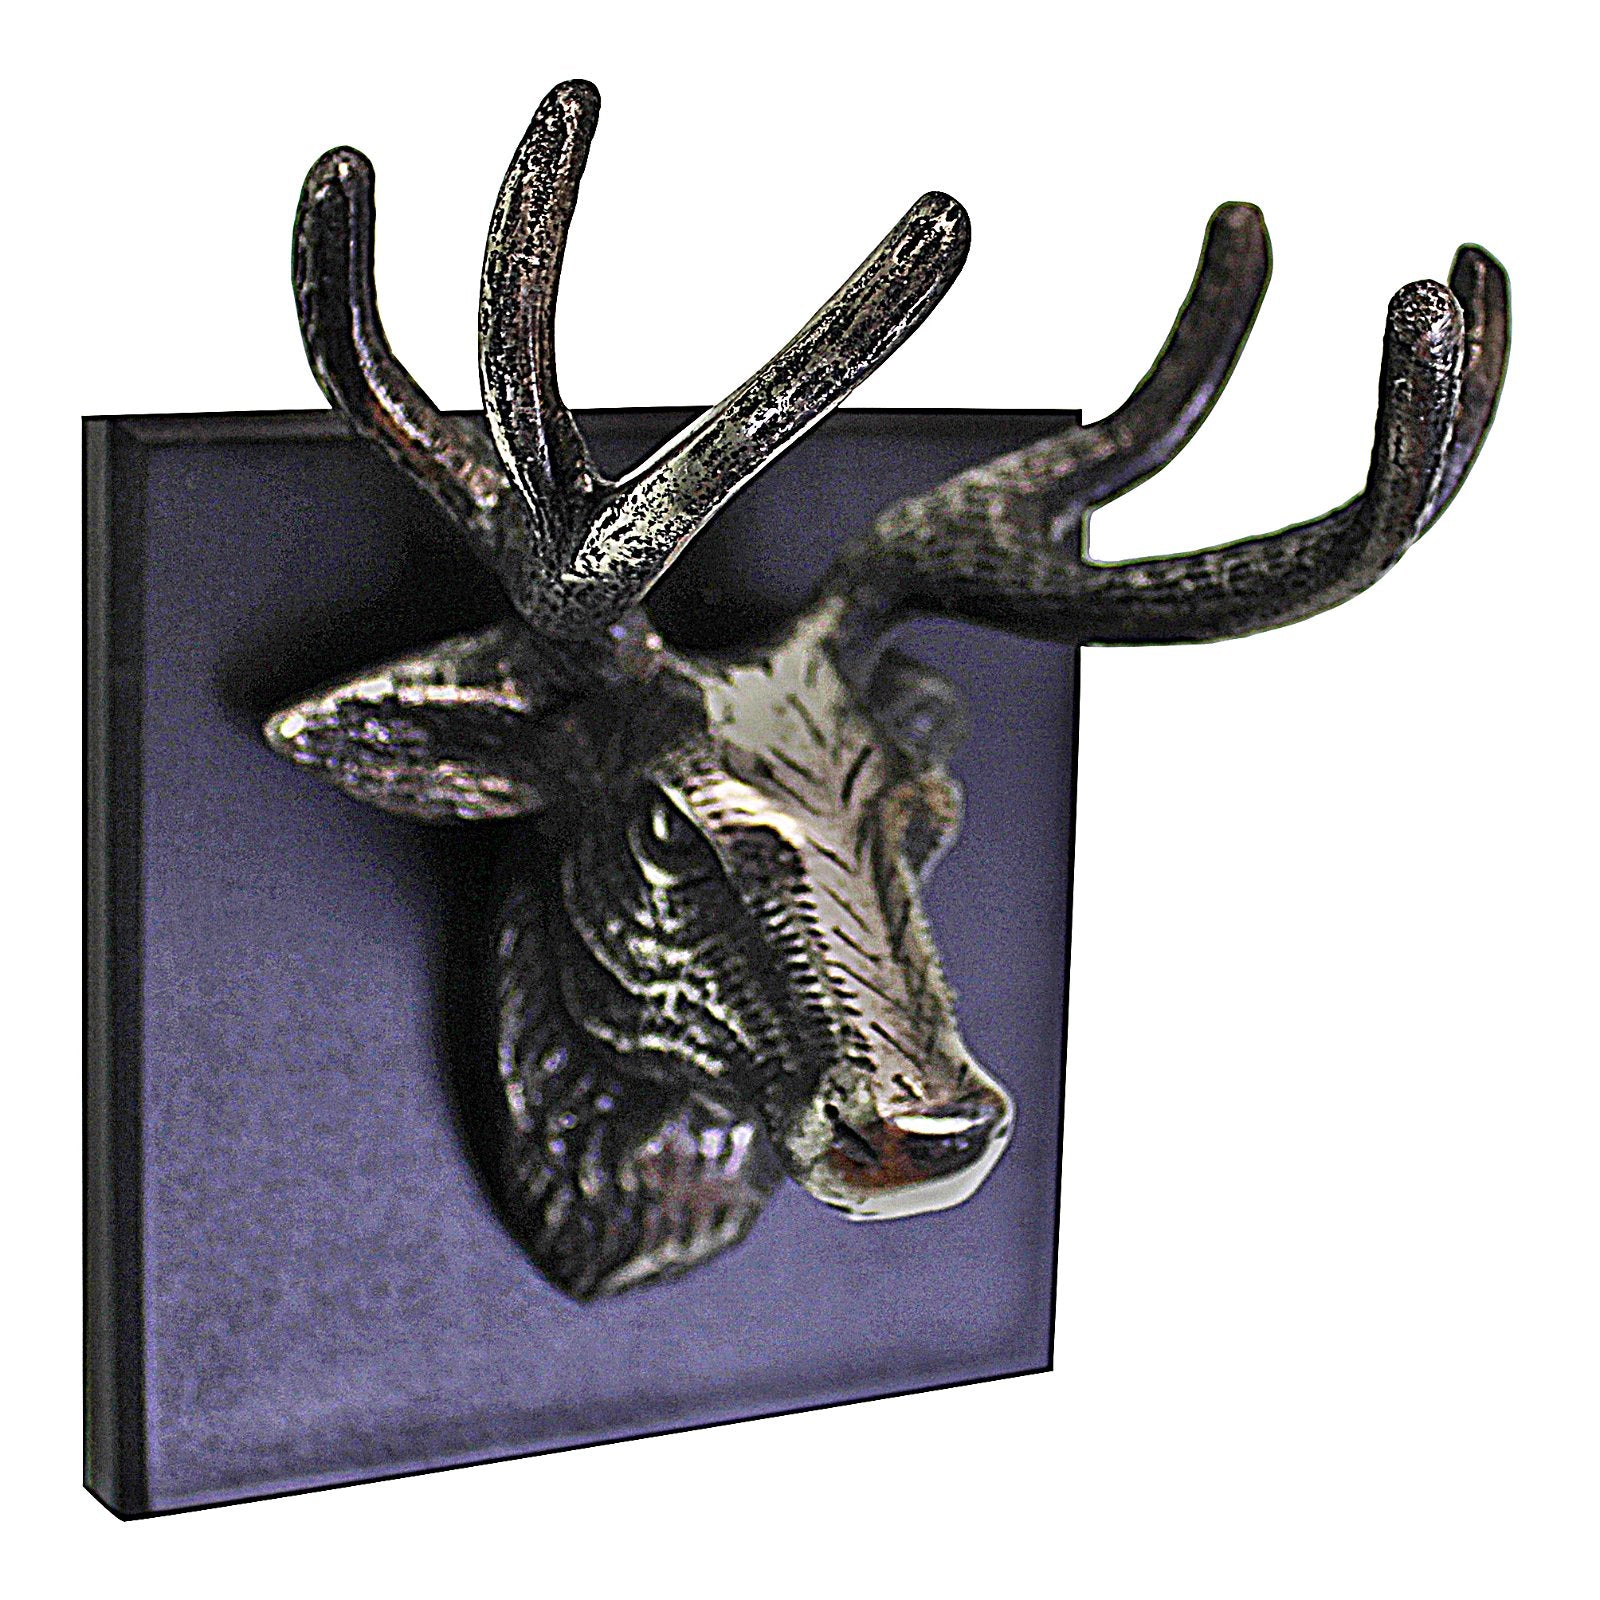 View Single Stags Head Wall Mounted Ornament information